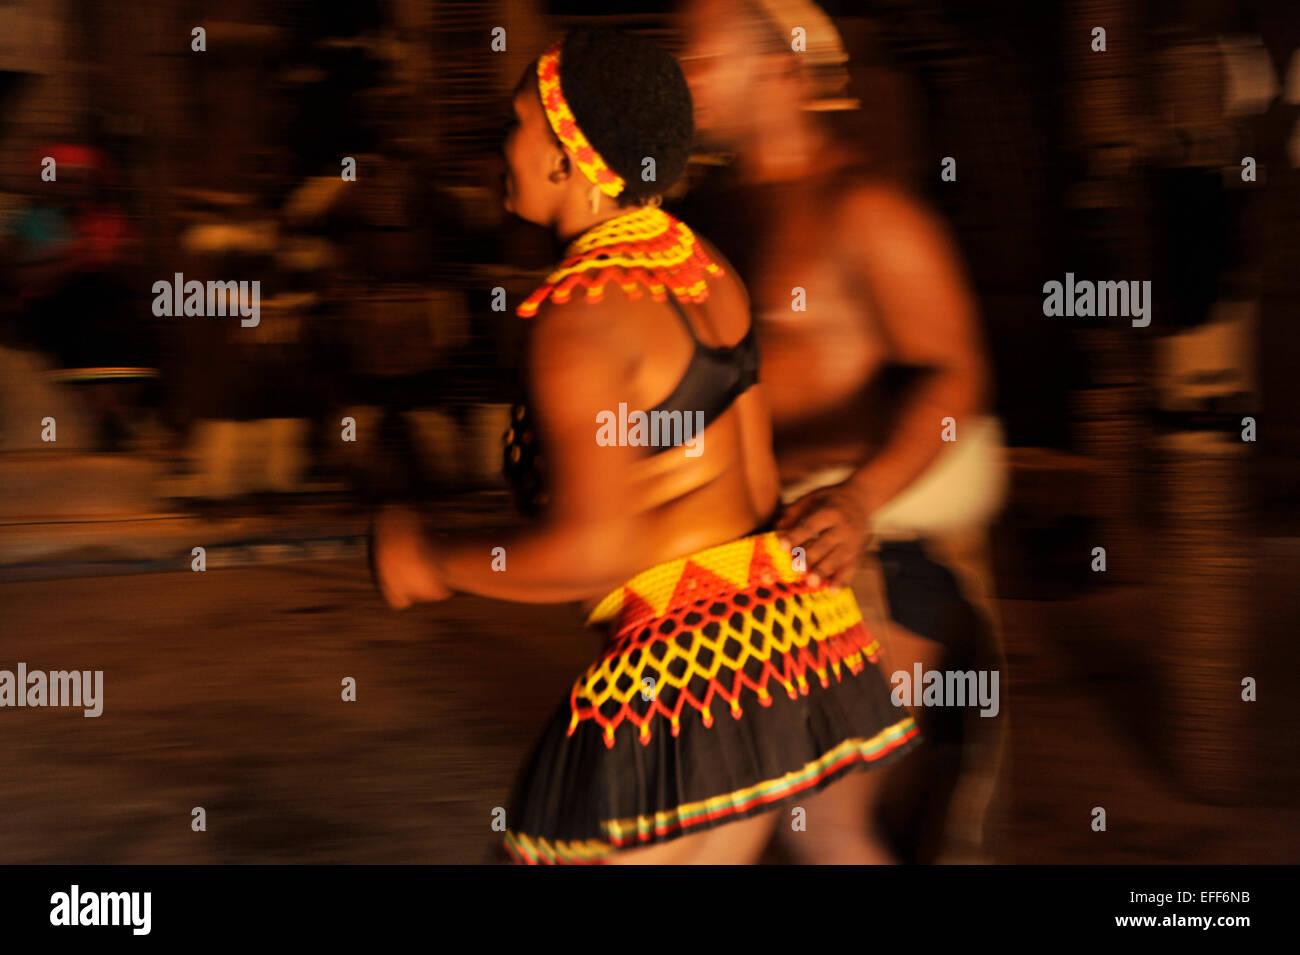 People, young woman dancer, culture, colourful beaded dress, with male performer, traditional dance, Shakaland theme village, South Africa, movement Stock Photo